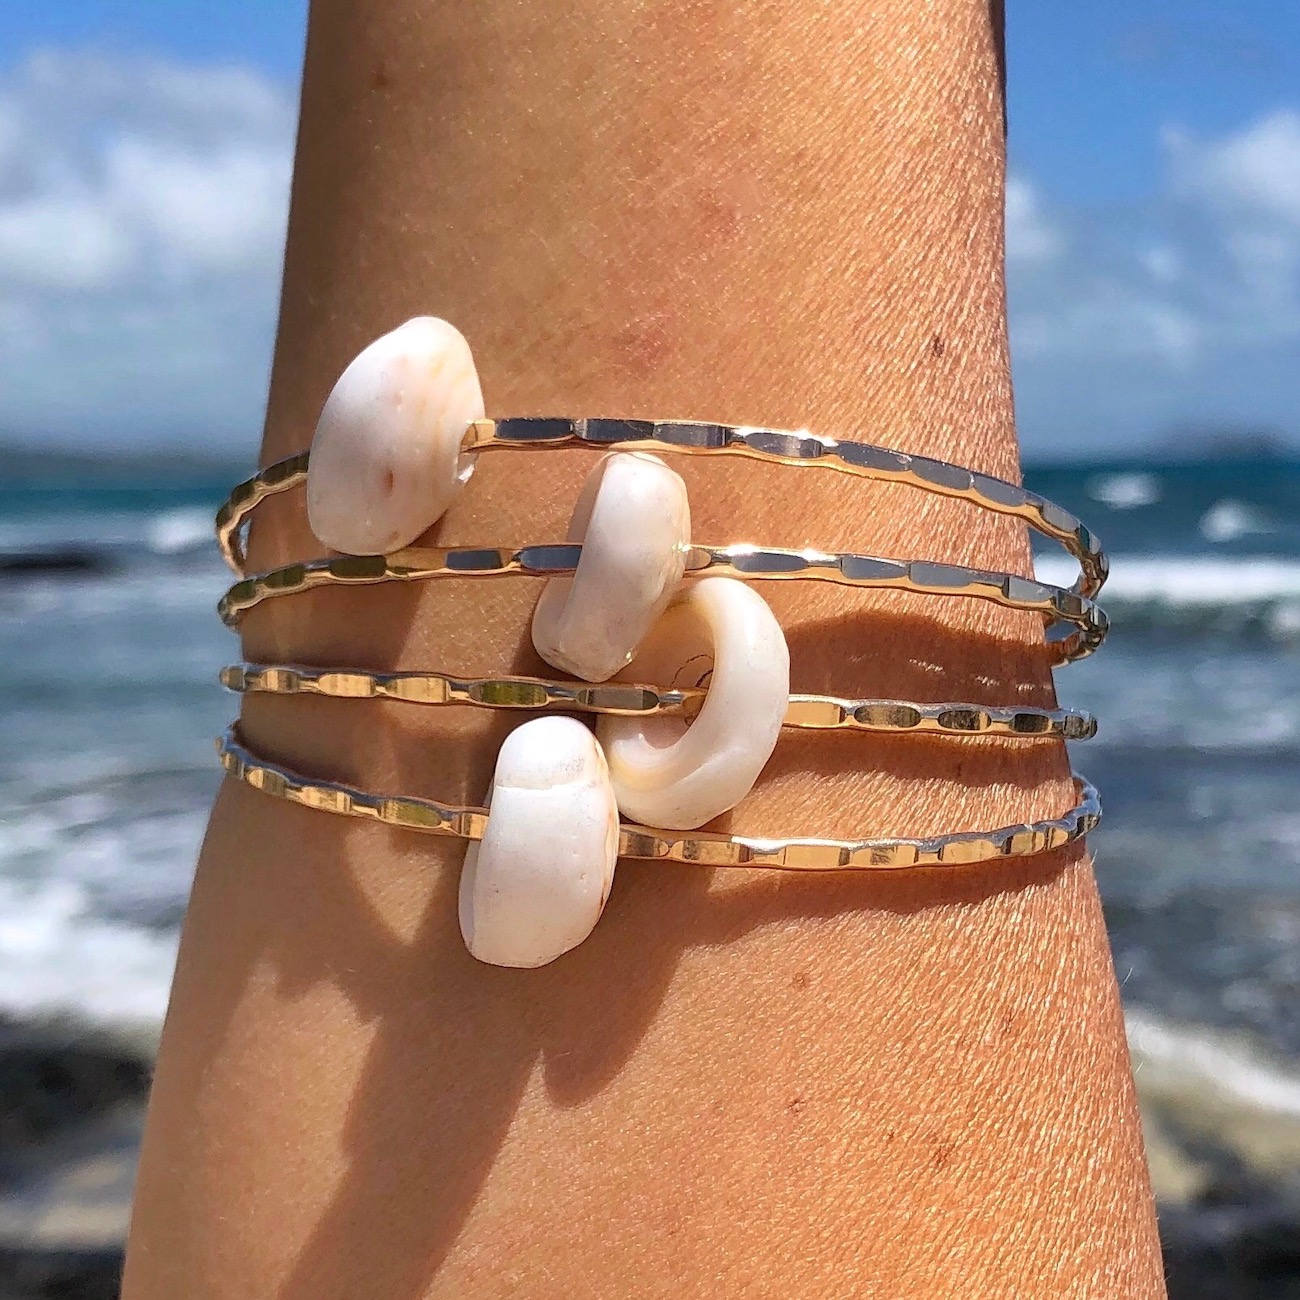 fuyo Handmade Seashell Bracelet, Size Adjustable for Women Beach Jewelry  adjustable from 7.87 inches to 13.39 inches white: Buy Online at Best Price  in UAE - Amazon.ae